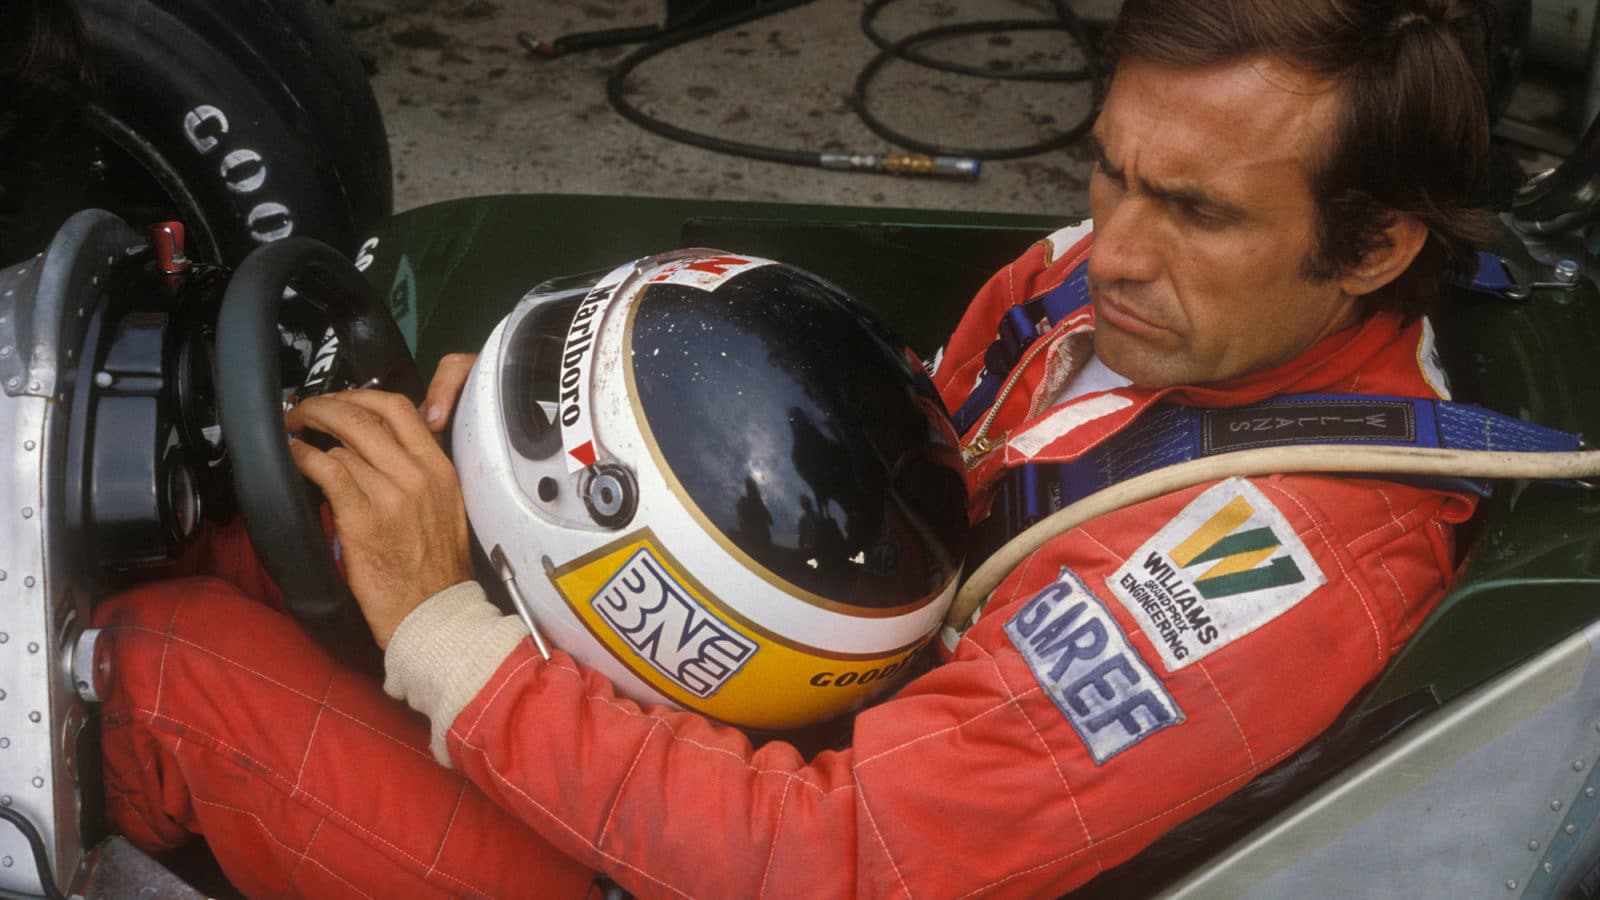 Carlos Reutemann in his Williams ahead of the 1980 South African Grand Prix